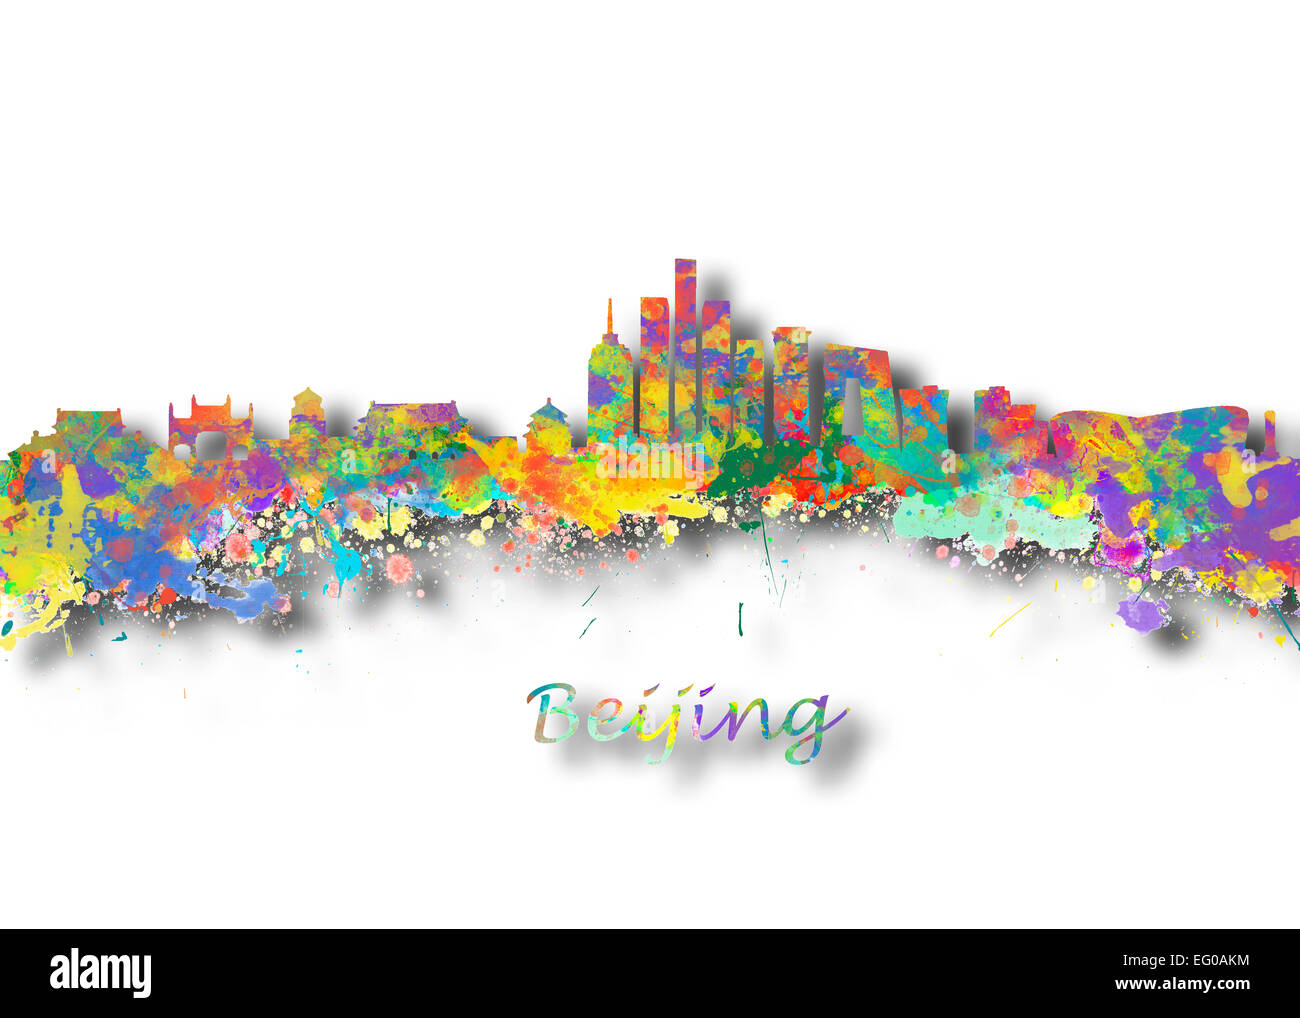 Watercolor art print of the skyline of Beijing China Beautiful Wall Art / Home Decor Canvas Prints Image. great presentation in Stock Photo